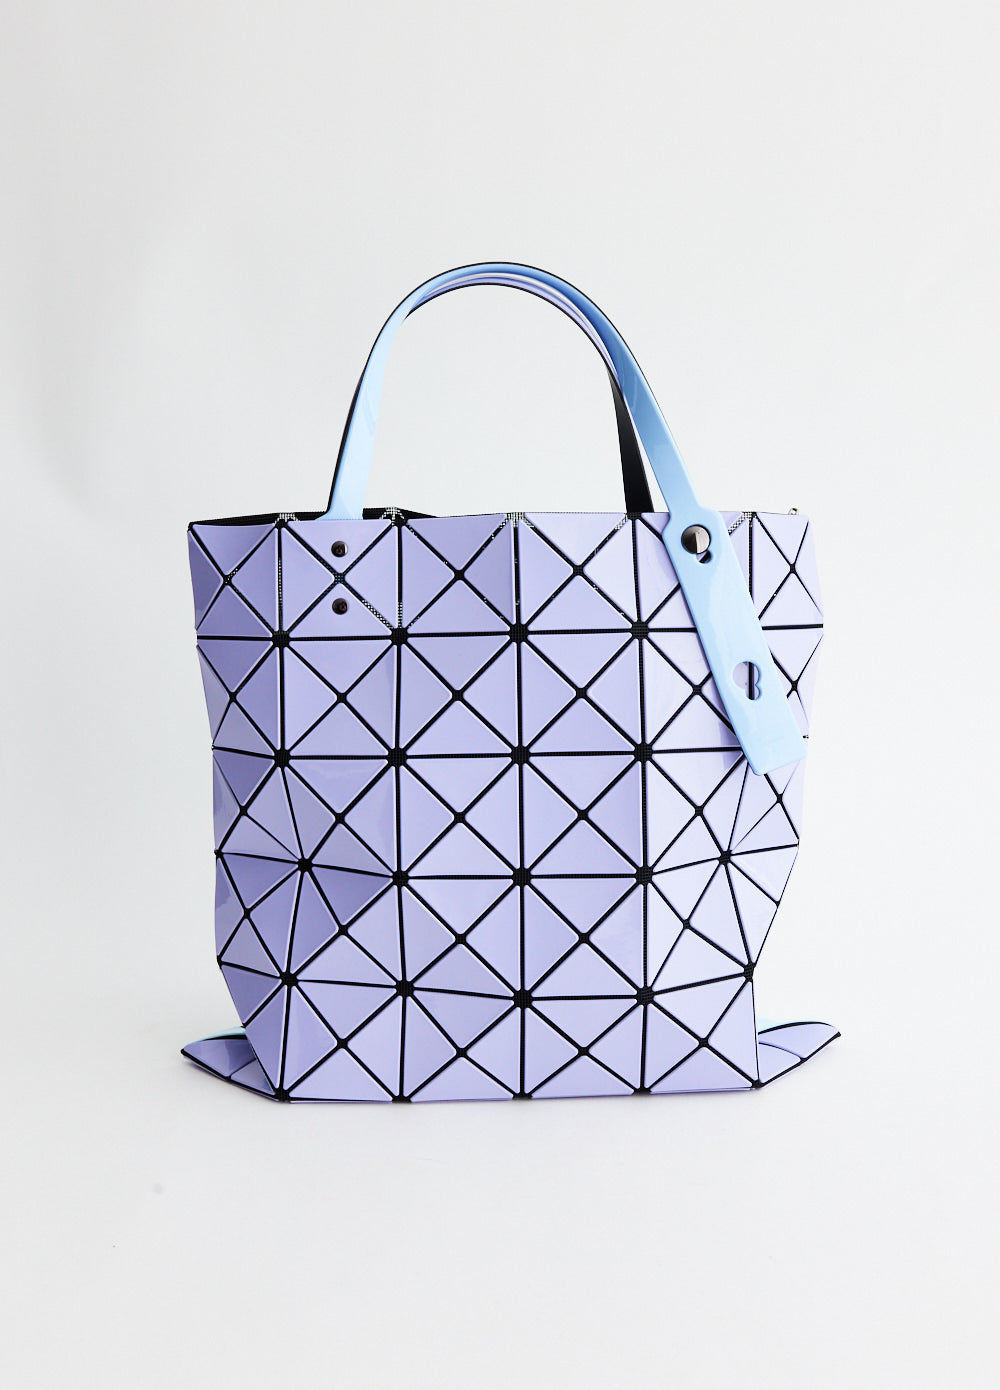 Bao Bao Issey Miyake  Lucent Gloss Mix Tote Bag in Blue & Lavender –  Henrik Vibskov Boutique